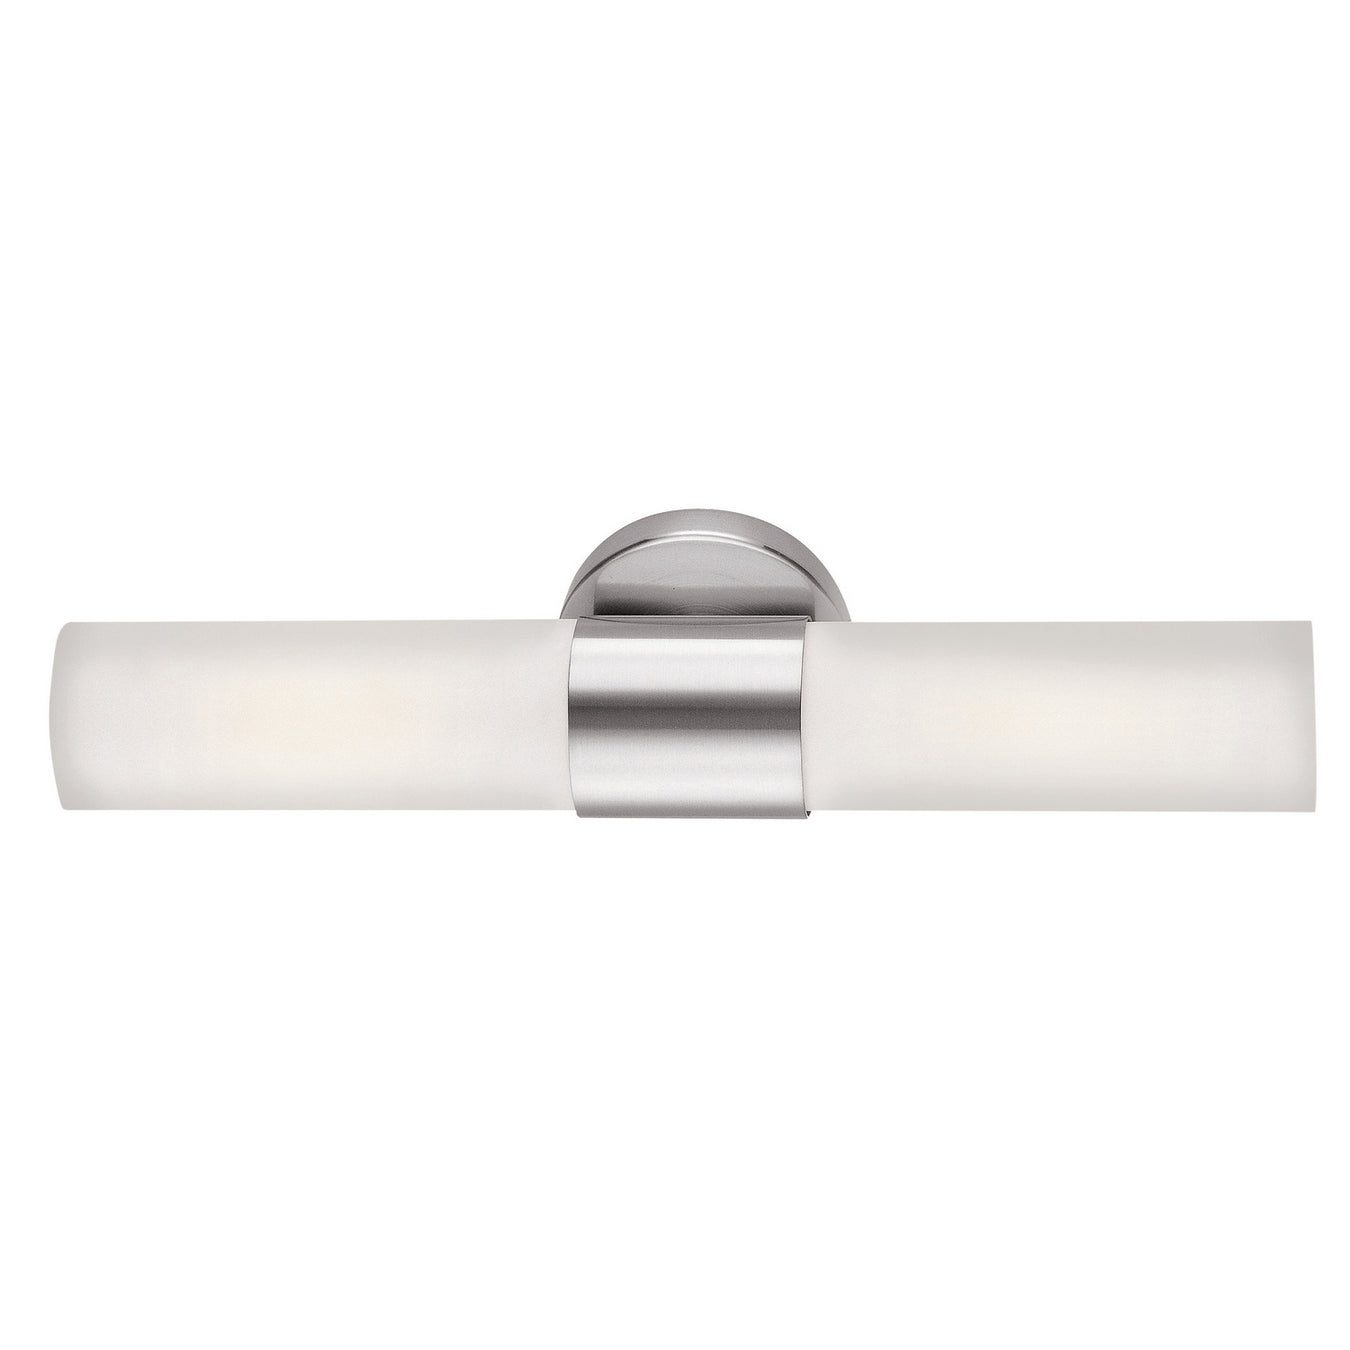 Aqueous 2-Light Wall Fixture in Brushed Steel Finish